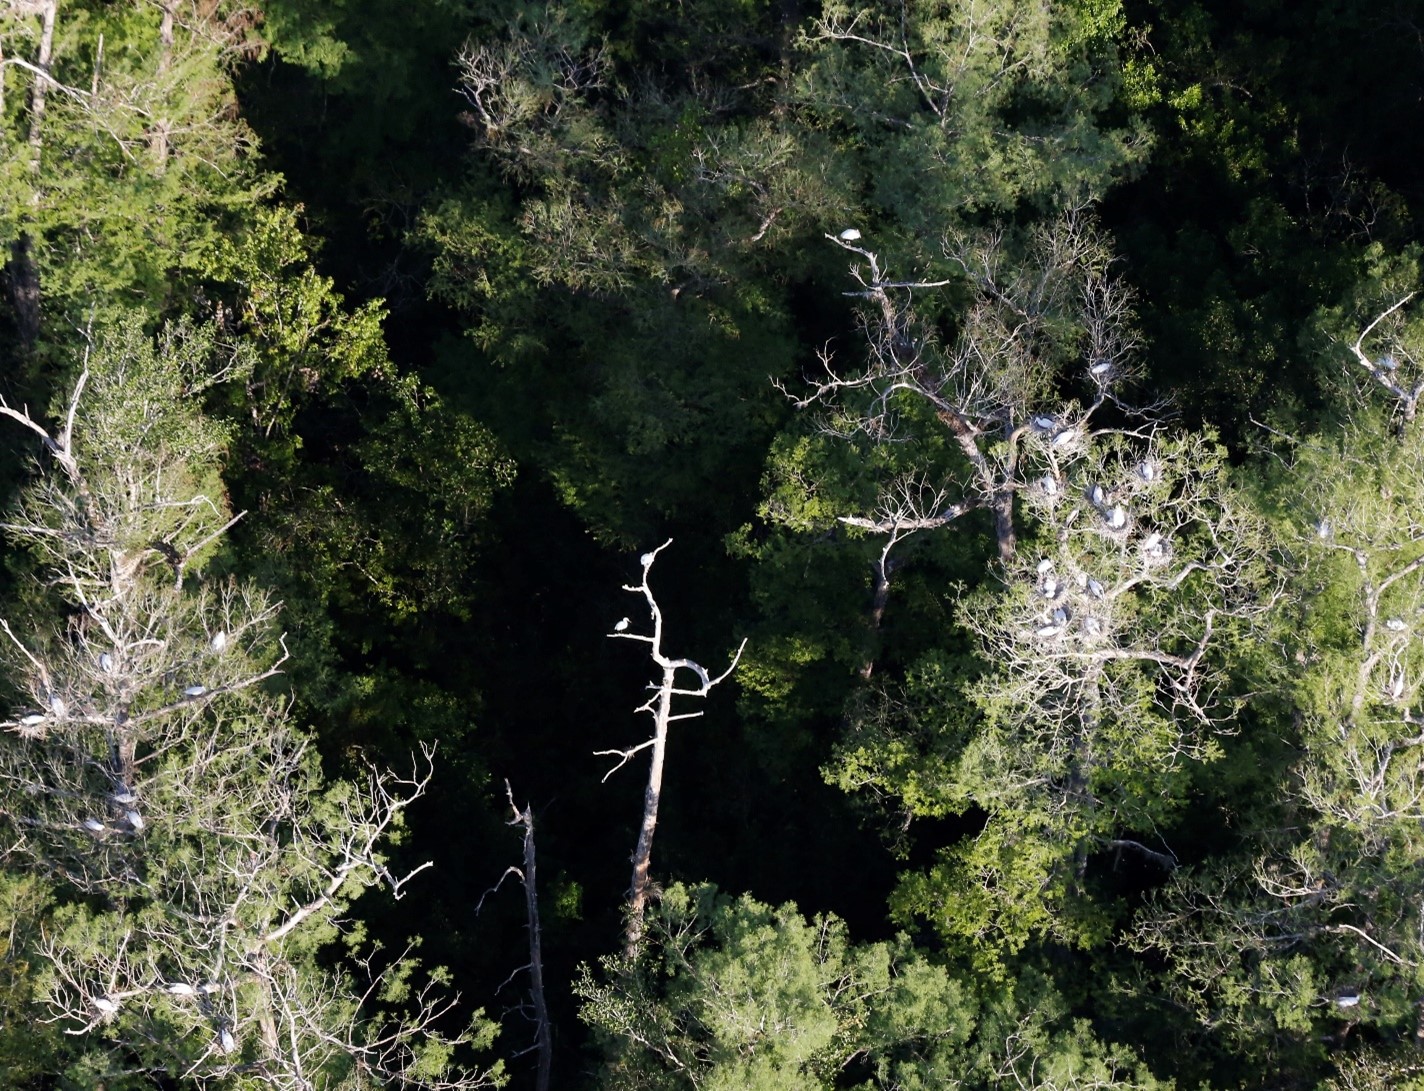 Aerial view of nests in treetops